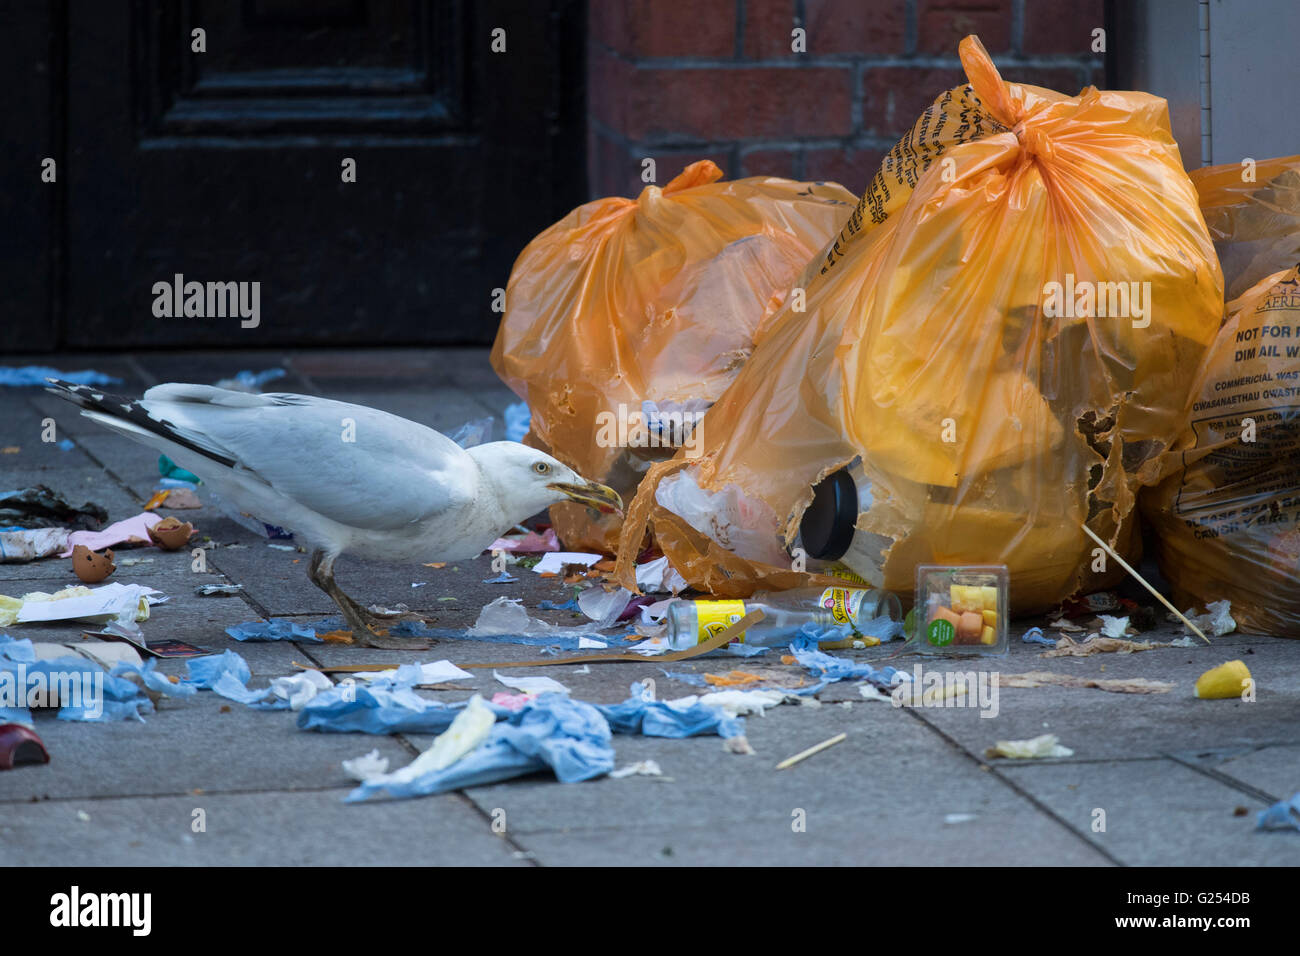 A seagull bird pecking at waste food in rubbish bags on the street. Stock Photo